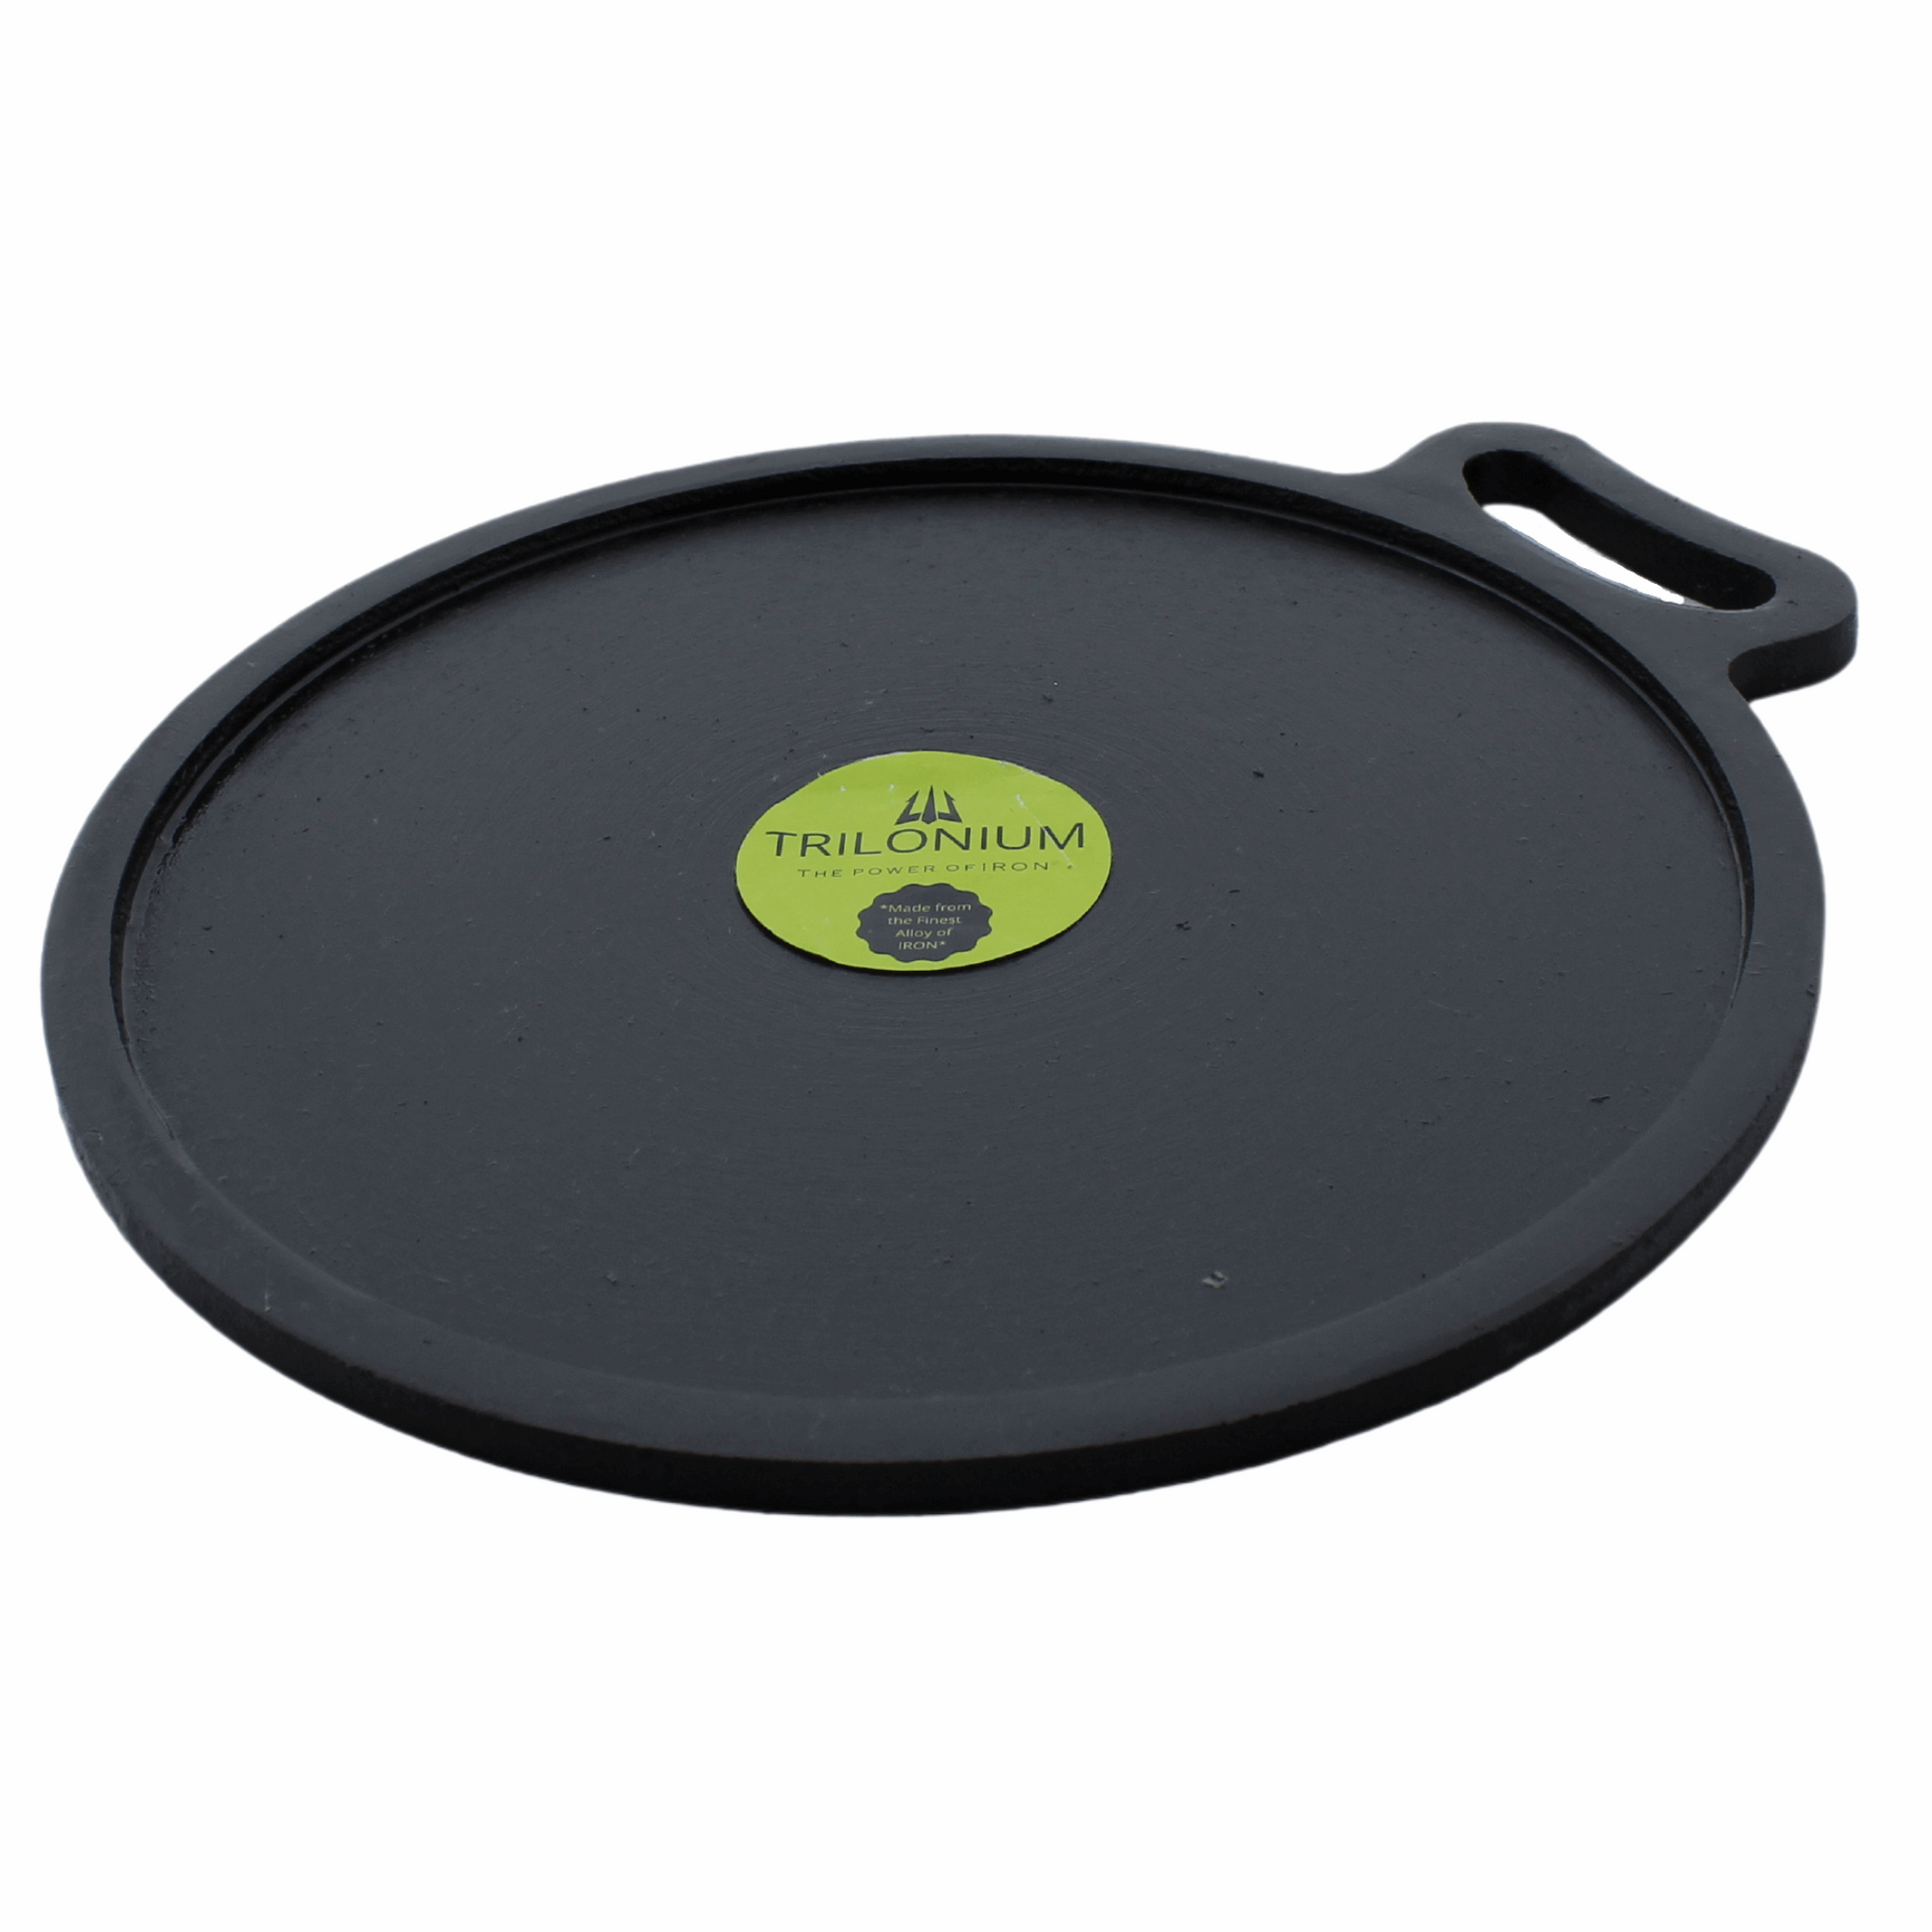  PG COUTURE Pre-Seasoned Cast Iron Tawa with Handle for Dosa/Roti /Chapati, Cookware, Induction & Gas Compatible